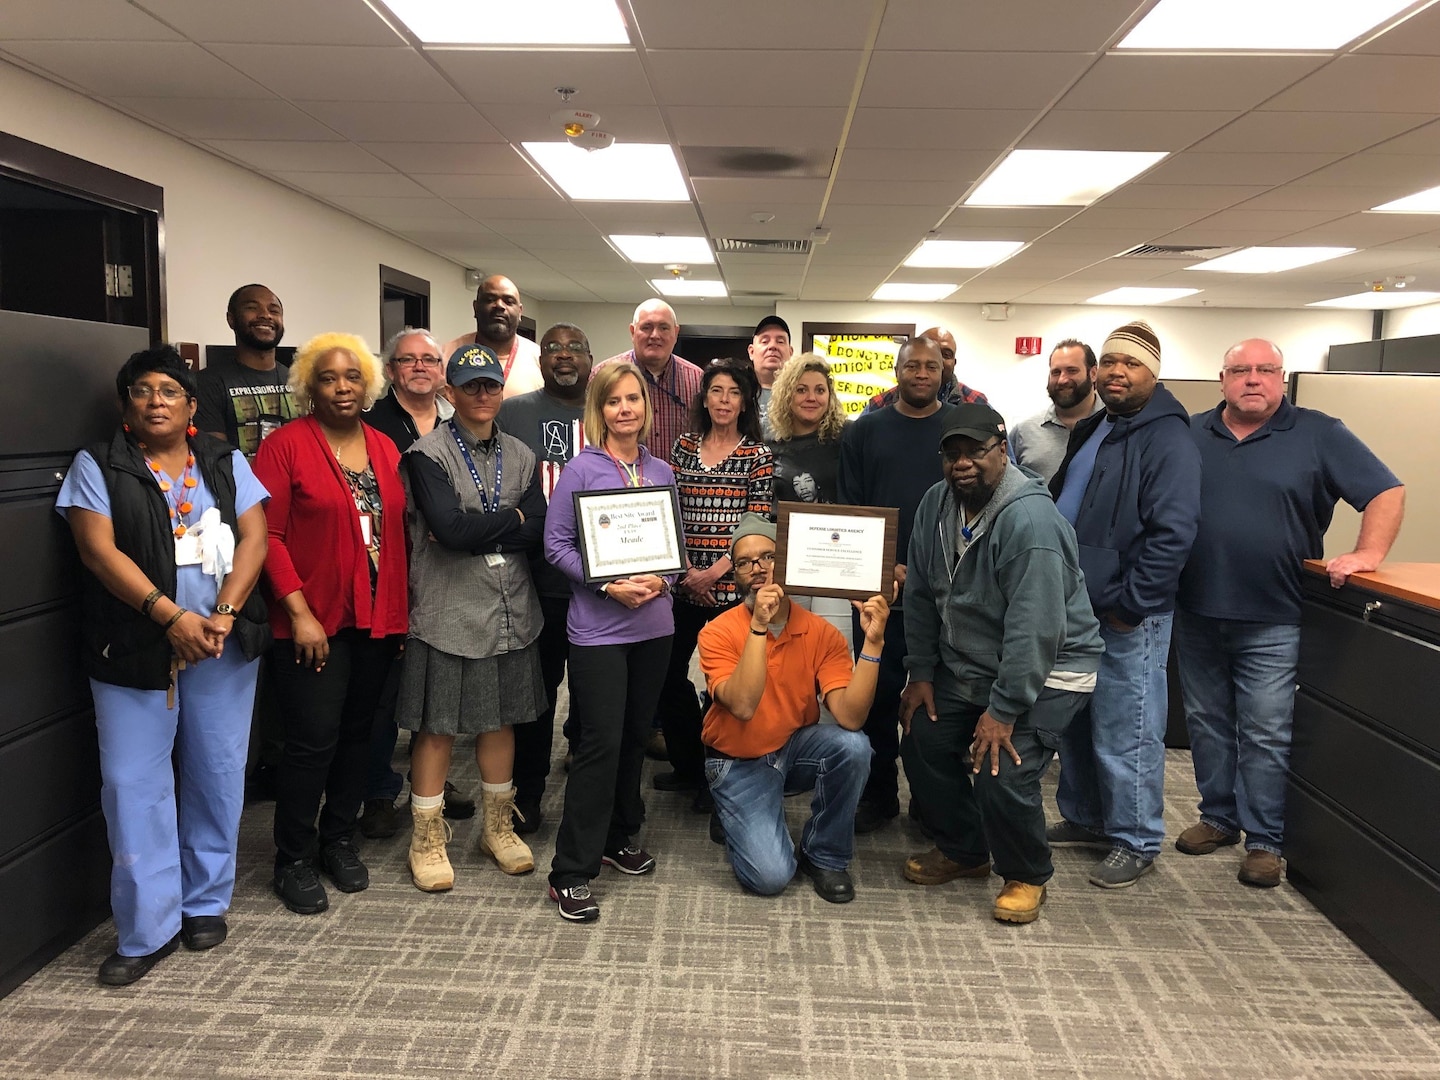 DLA Disposition Services at Fort Meade team pose with two certificate awards